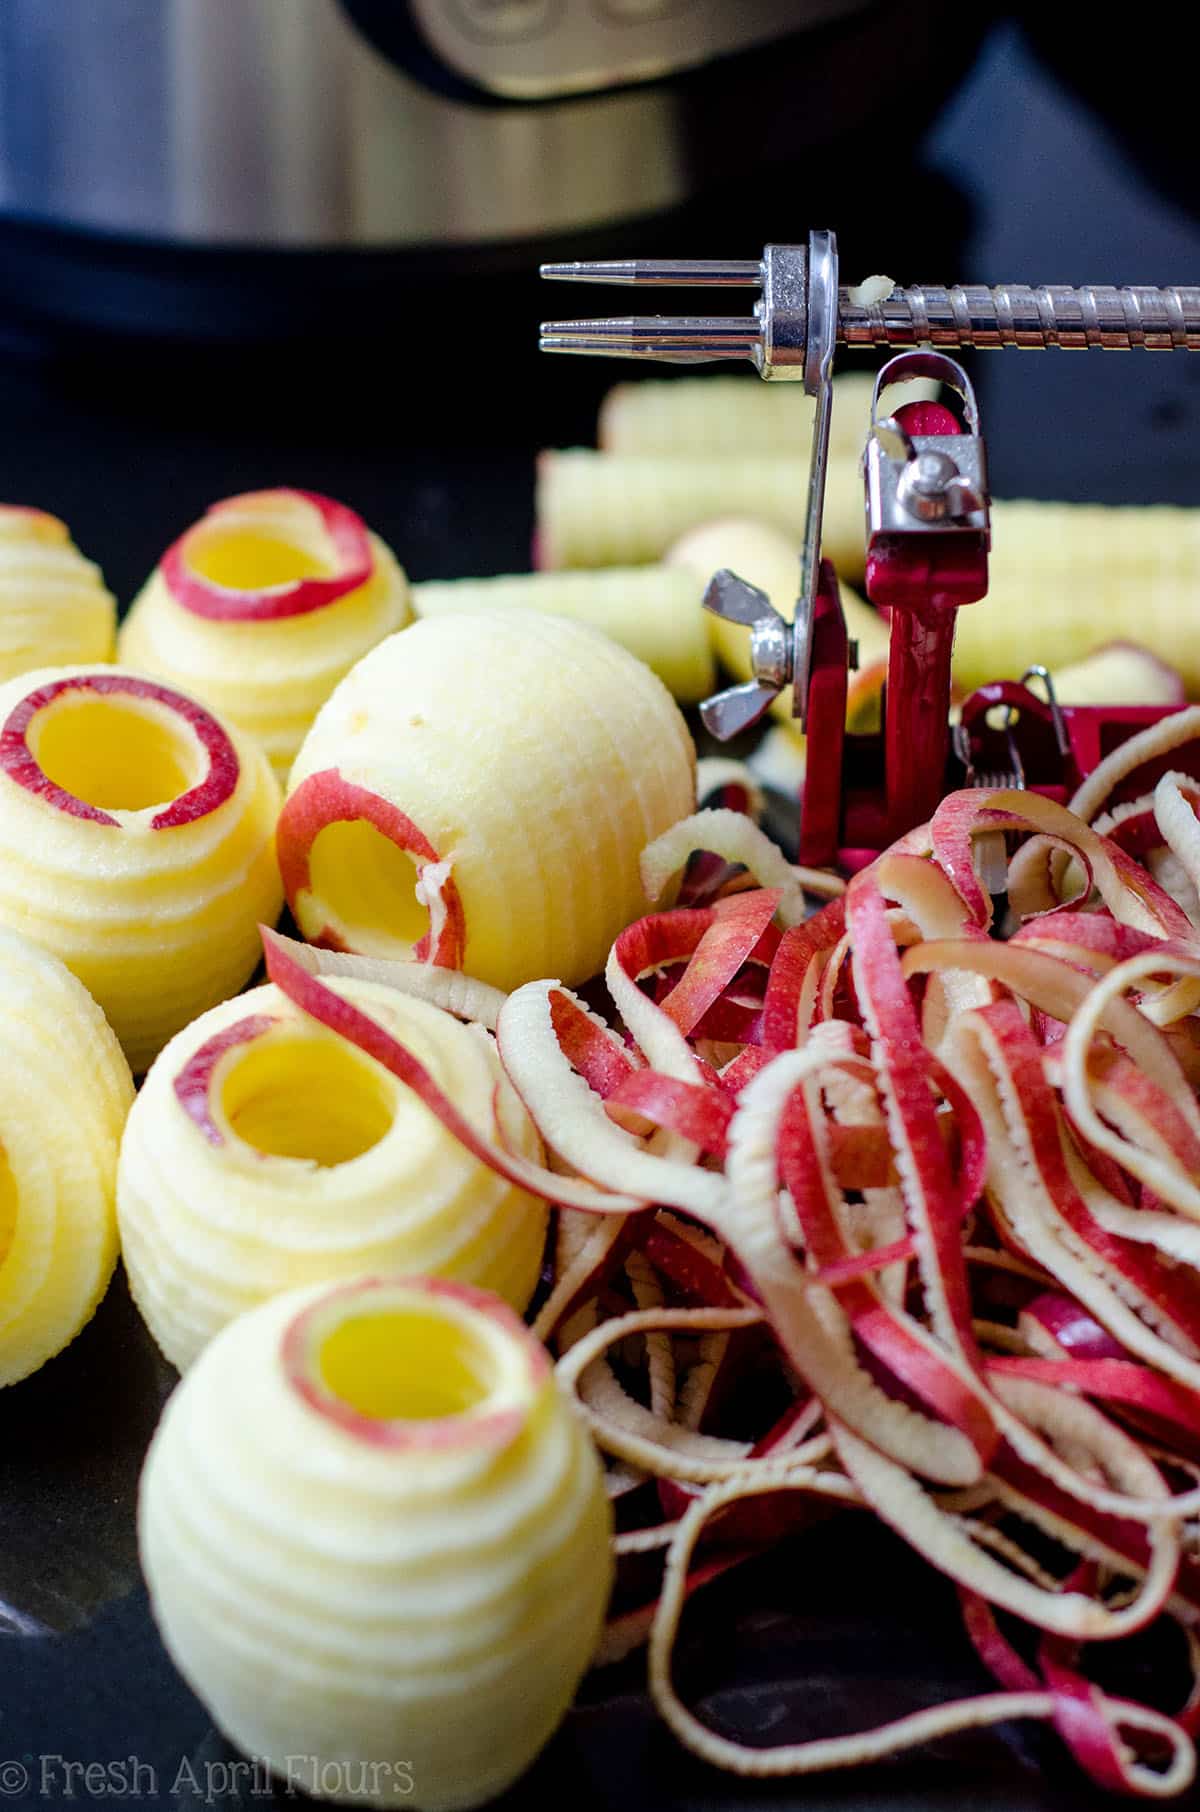 sliced and cored apples on a surface with an apple peeler in the background